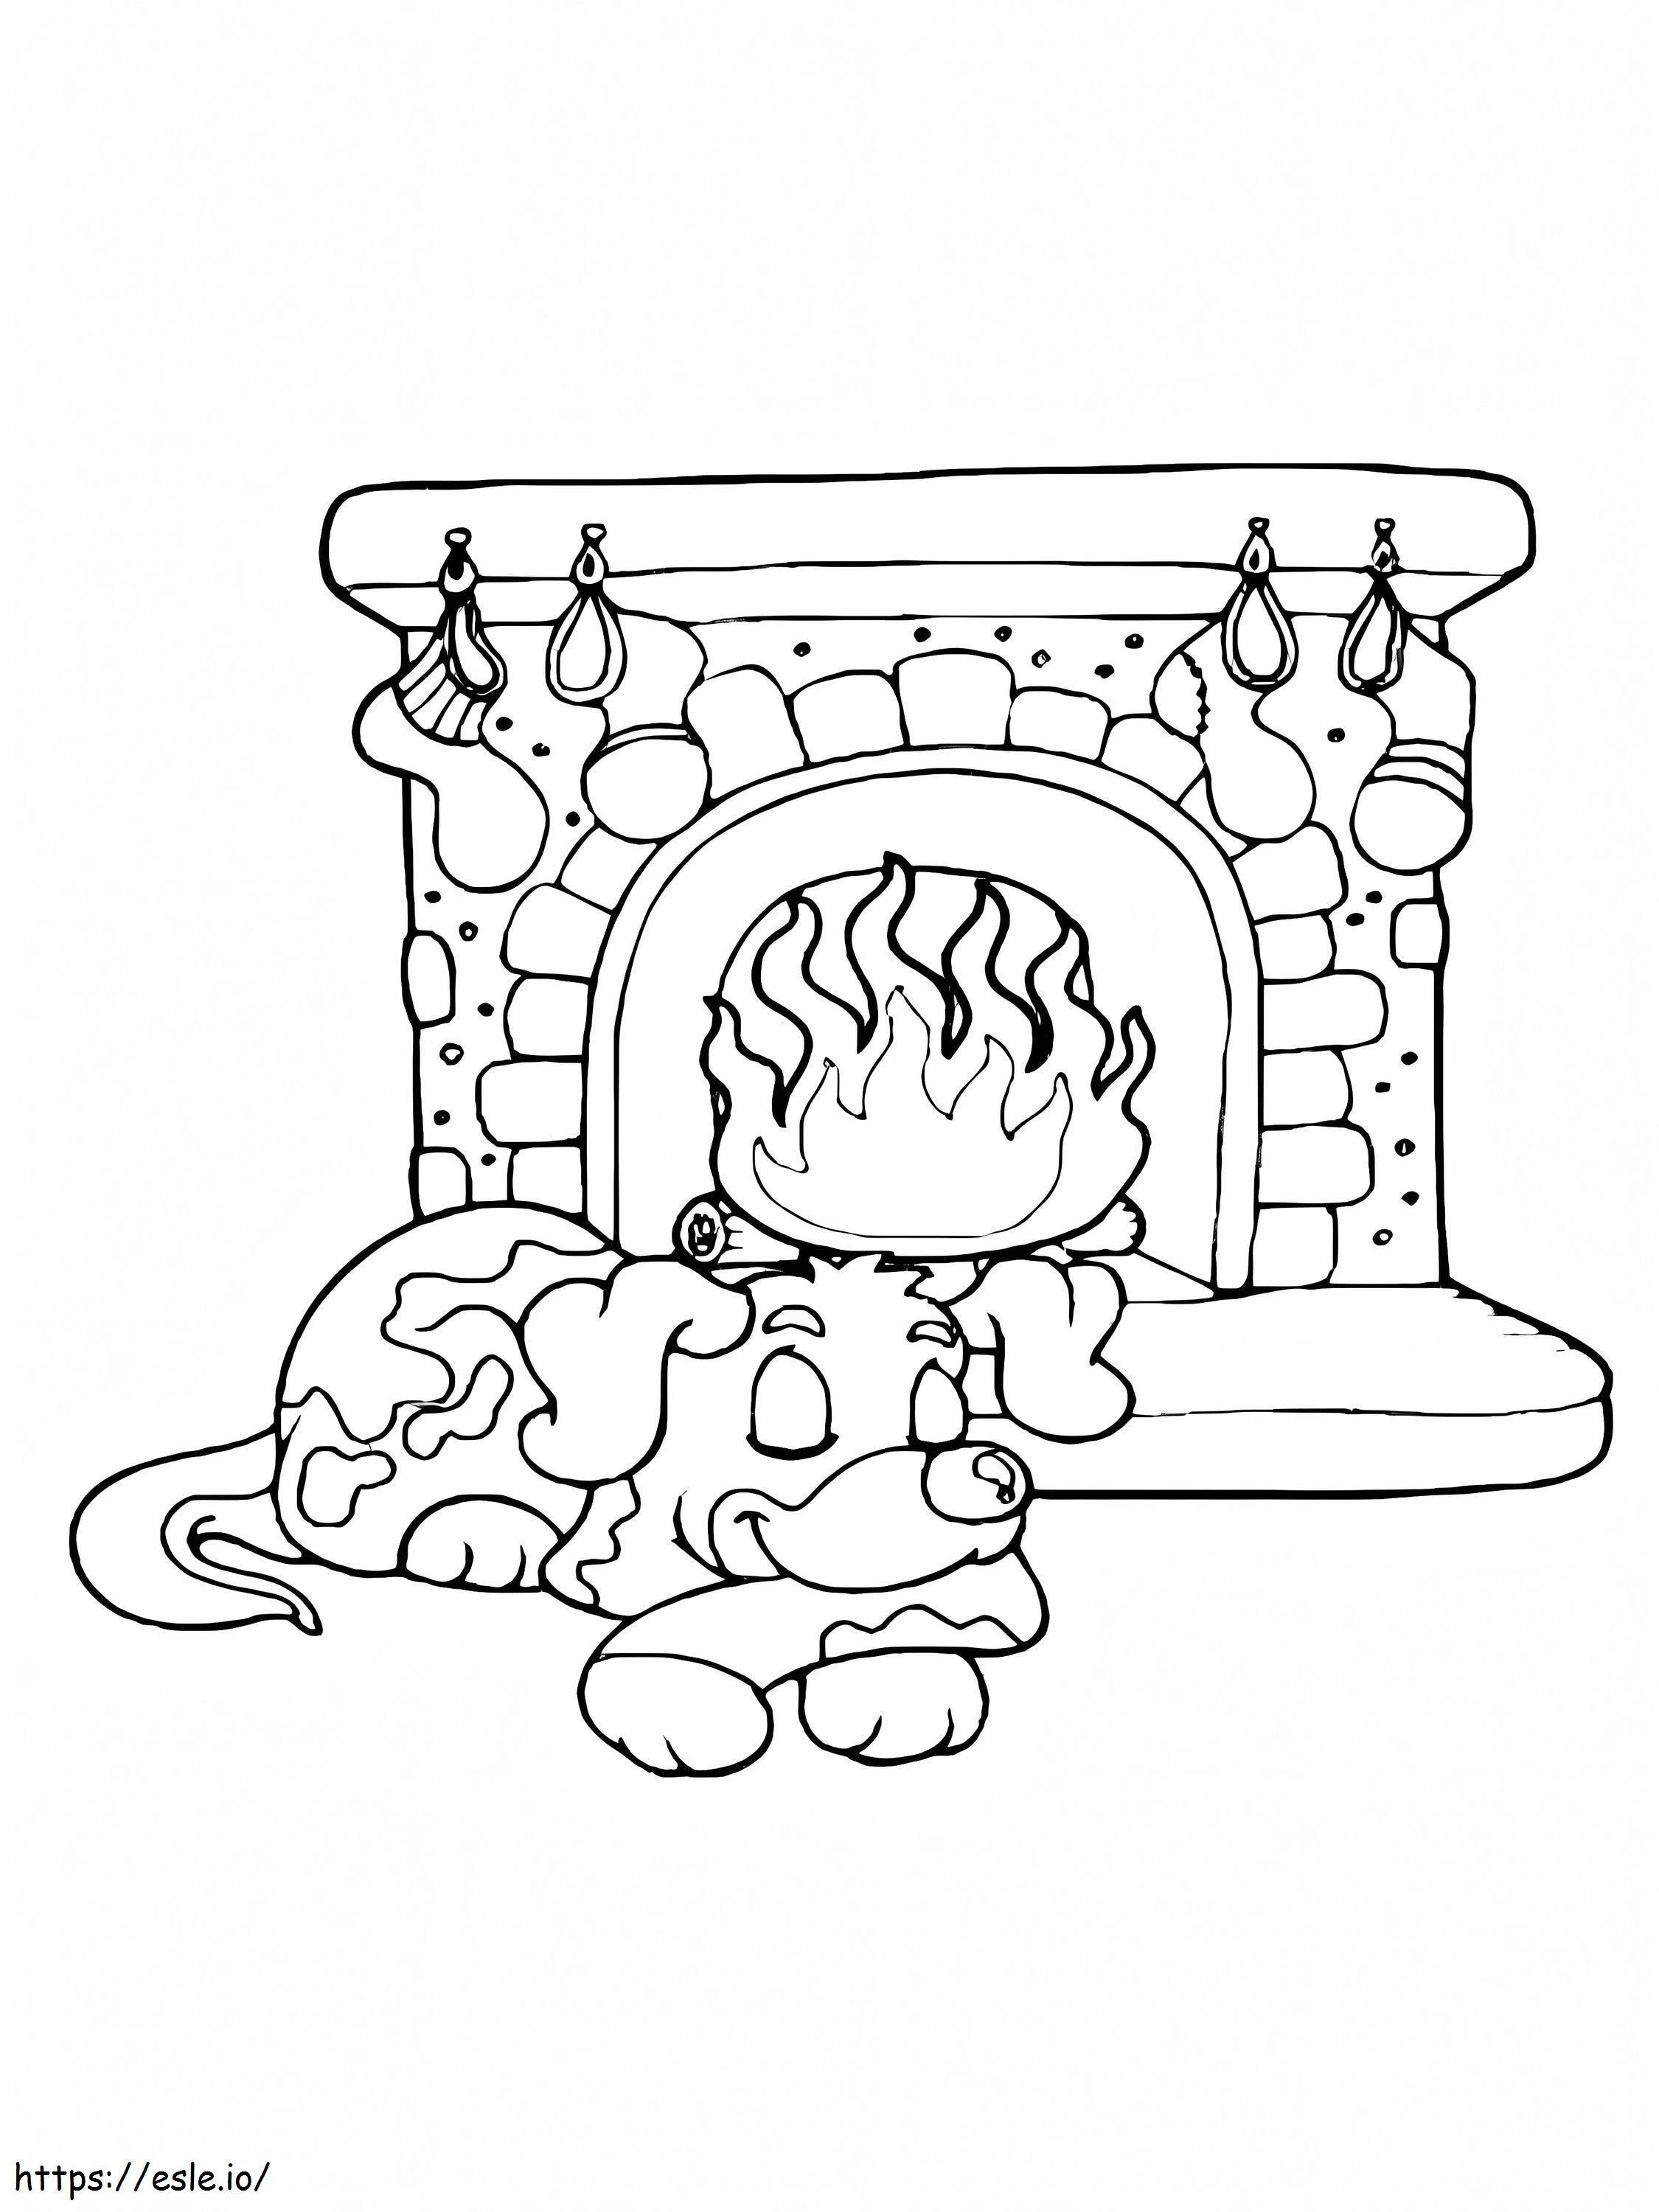 Sleeping Dog And Fireplace coloring page